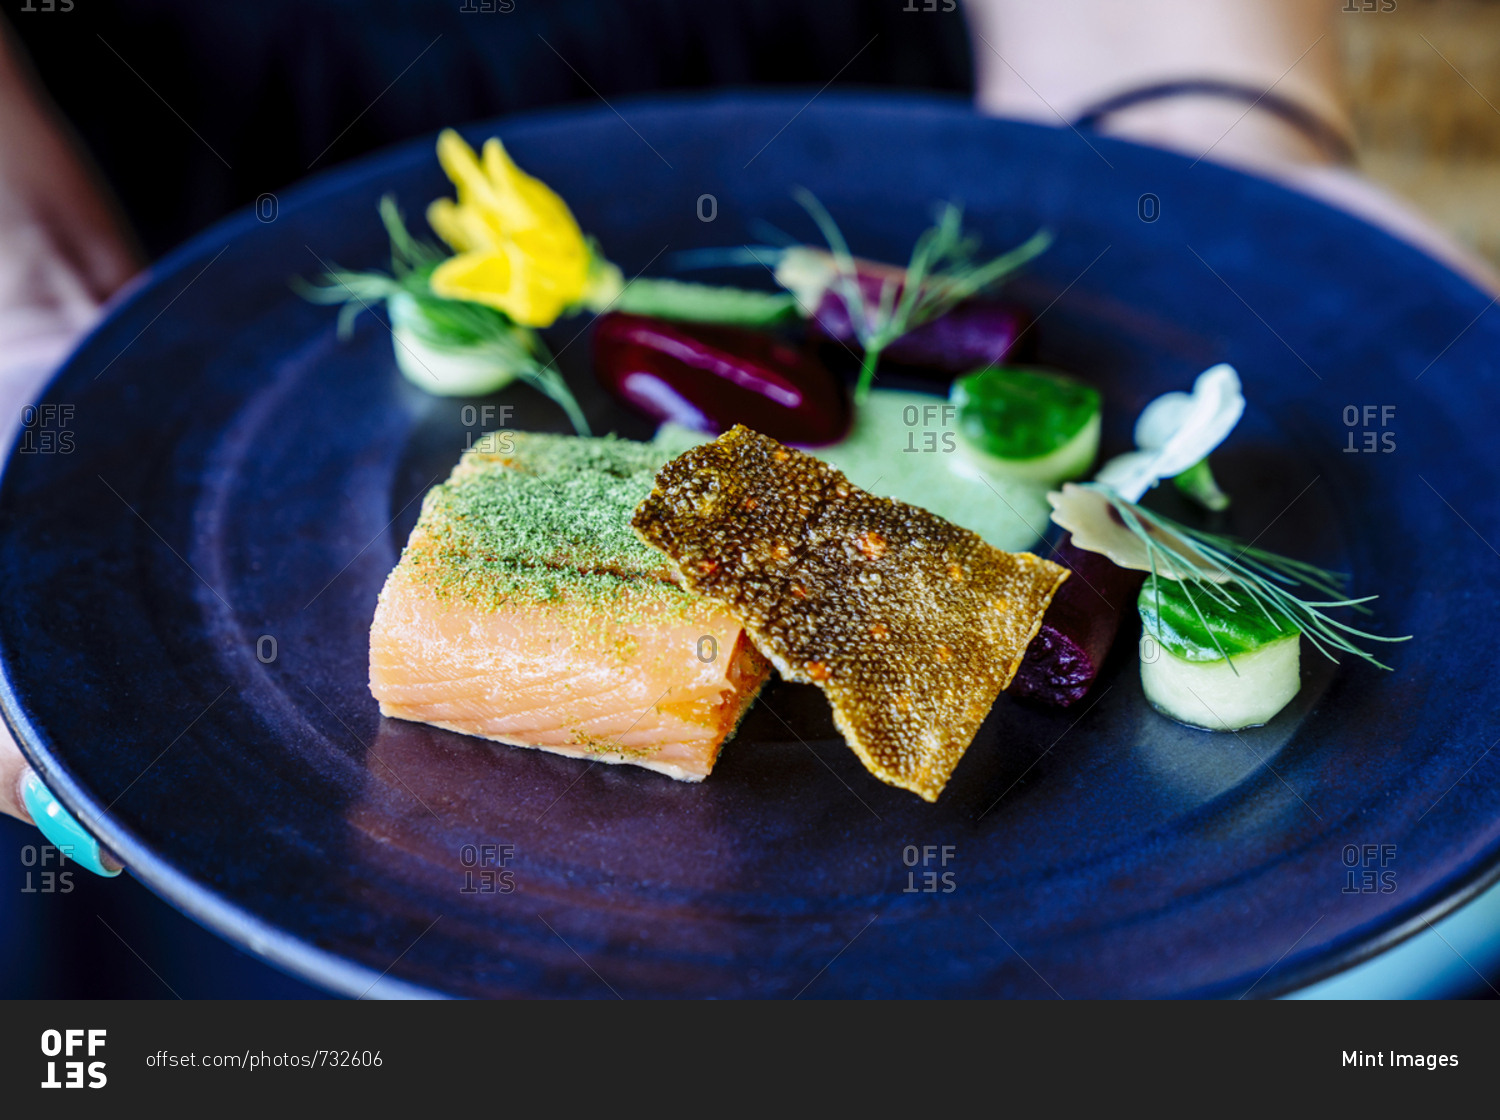 Salmon with smoked beets, cucumber, dill and zucchini blossom